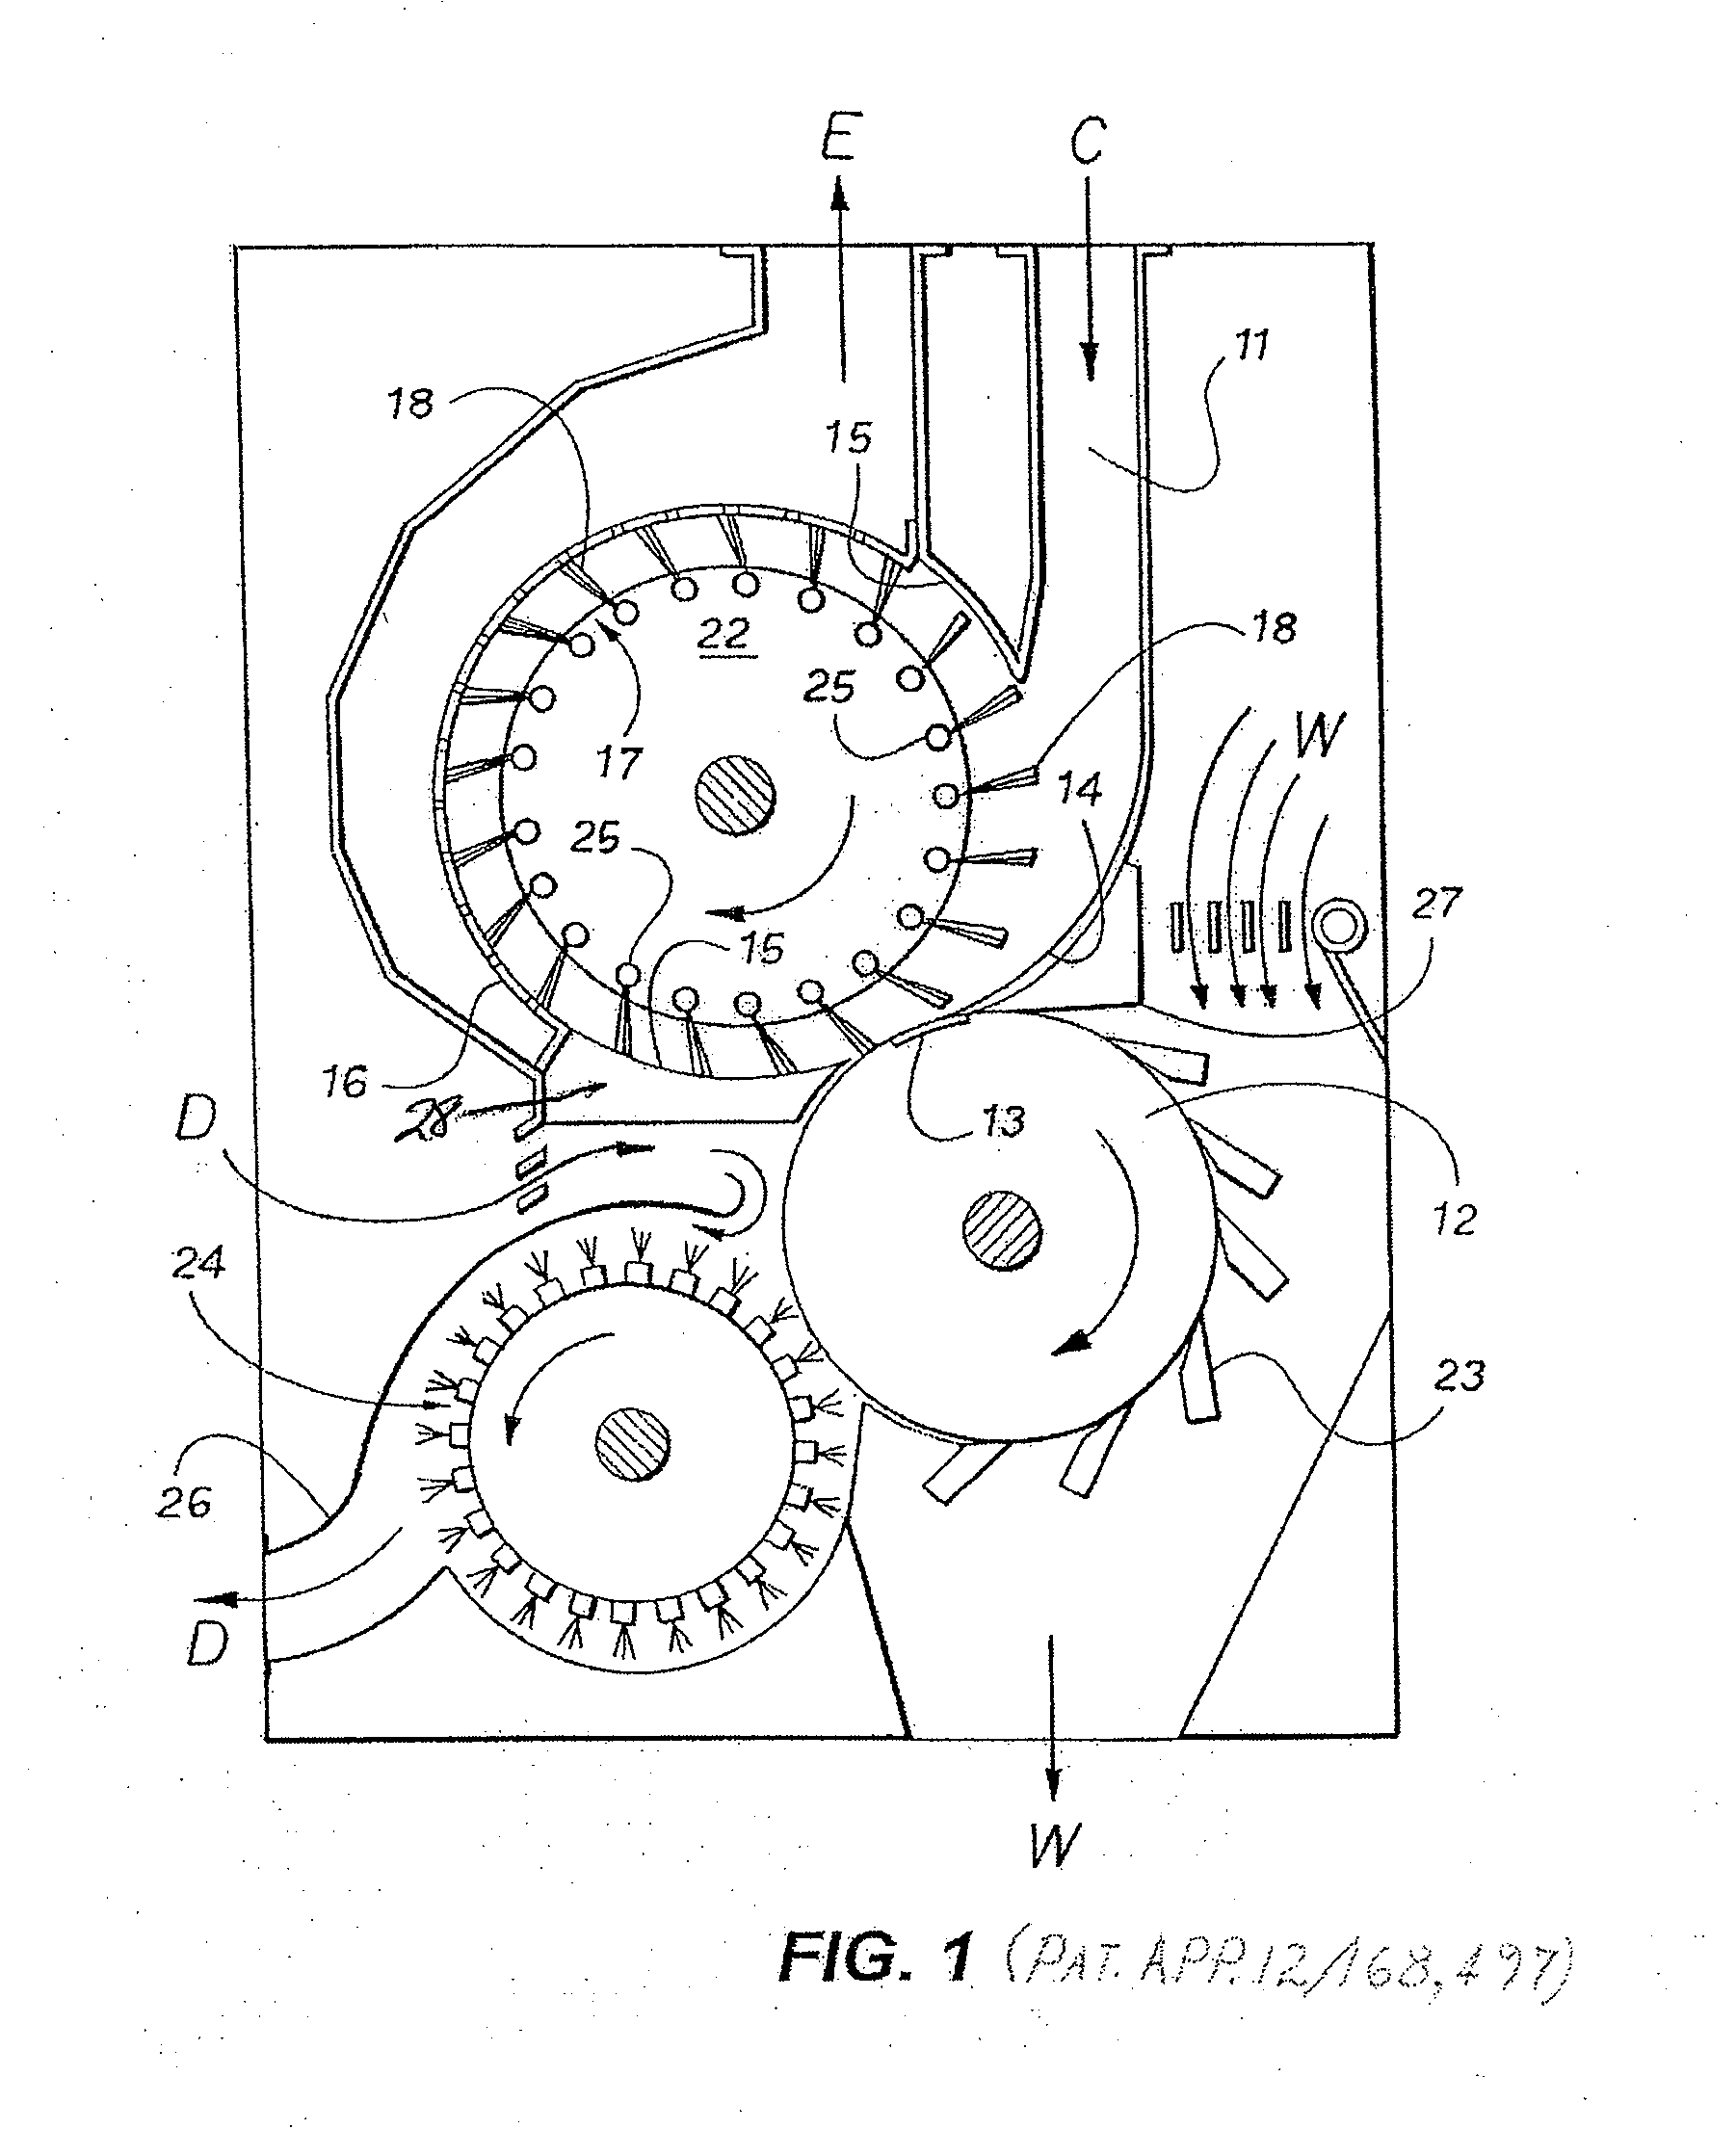 Method and Apparatus for Separating Foreign Matter from Fibrous Material